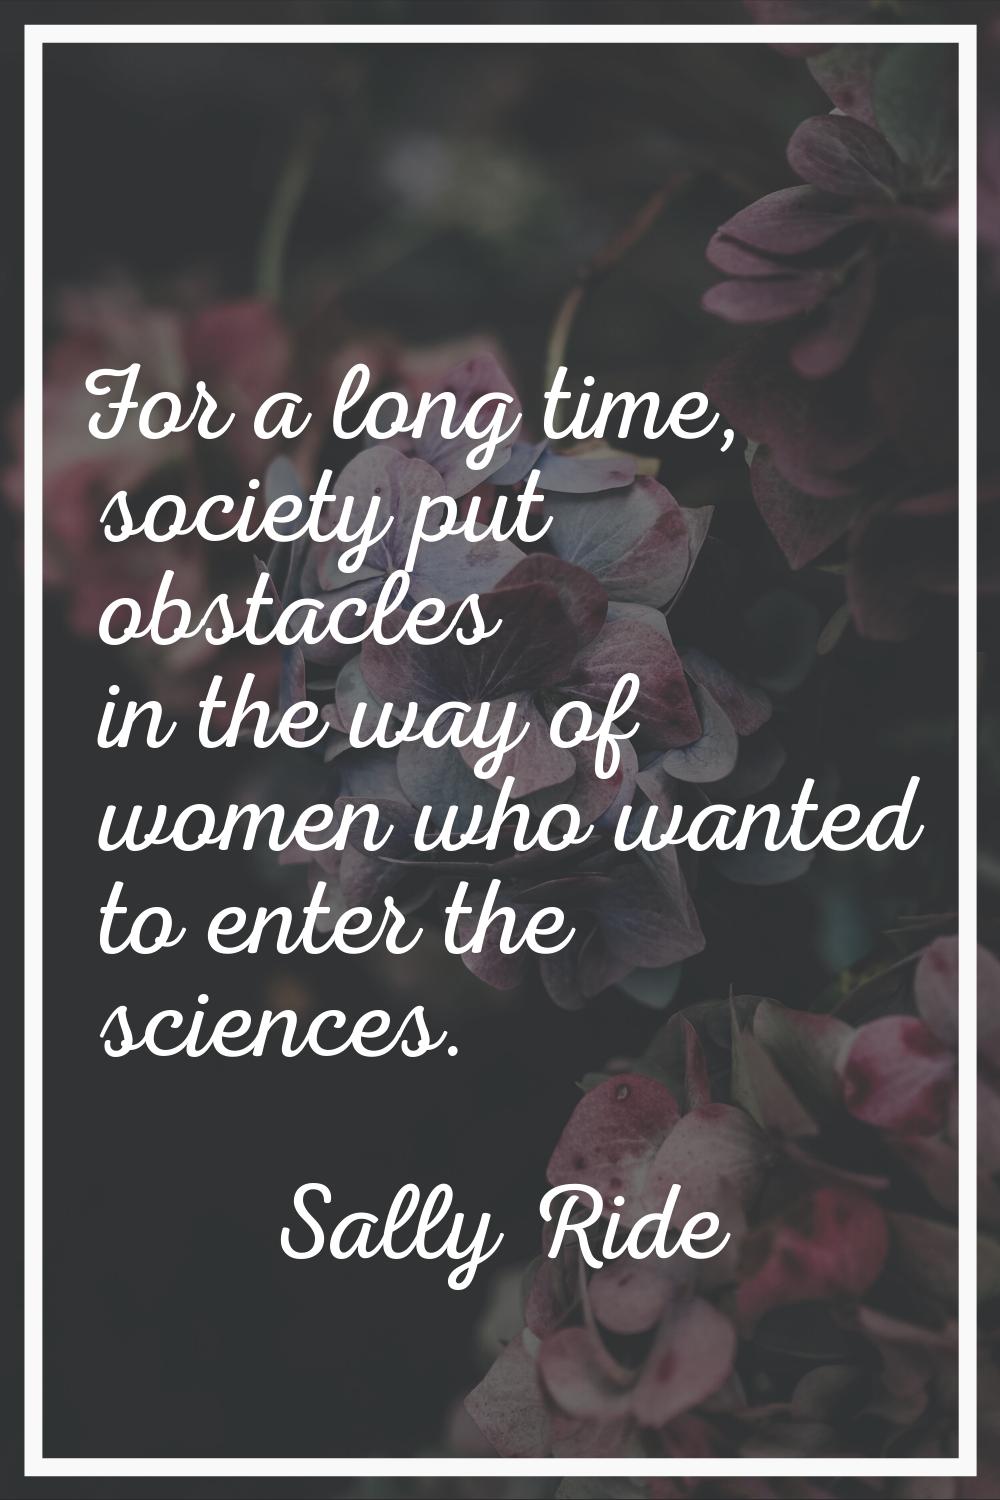 For a long time, society put obstacles in the way of women who wanted to enter the sciences.